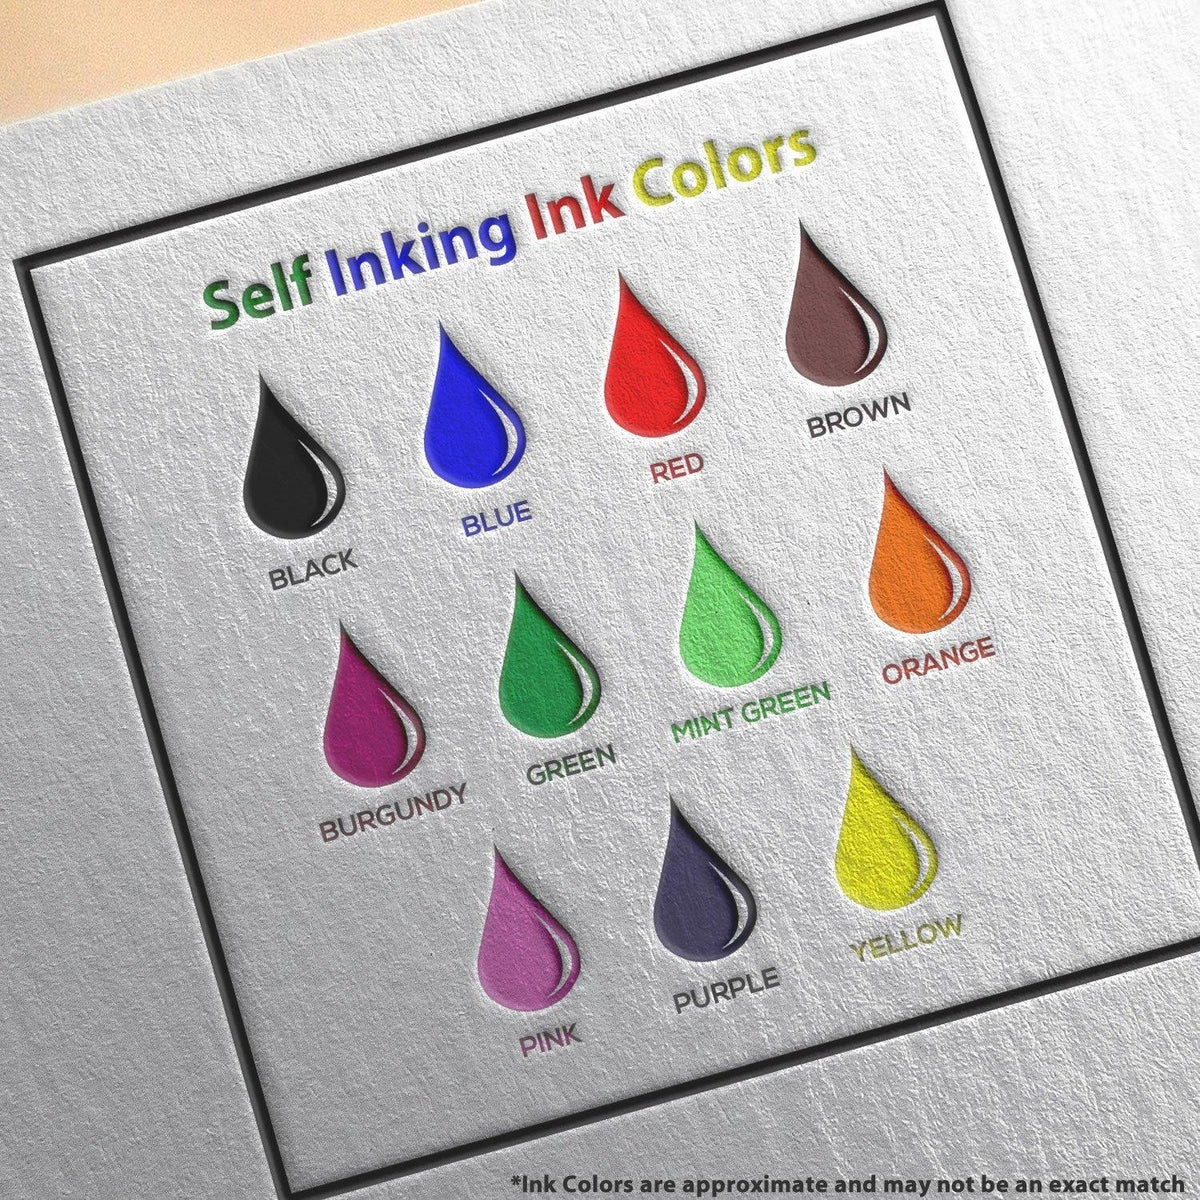 Self-Inking Check Your Work Stamp - Engineer Seal Stamps - Brand_Trodat, Impression Size_Small, Stamp Type_Self-Inking Stamp, Type of Use_Office, Type of Use_Postal &amp; Mailing